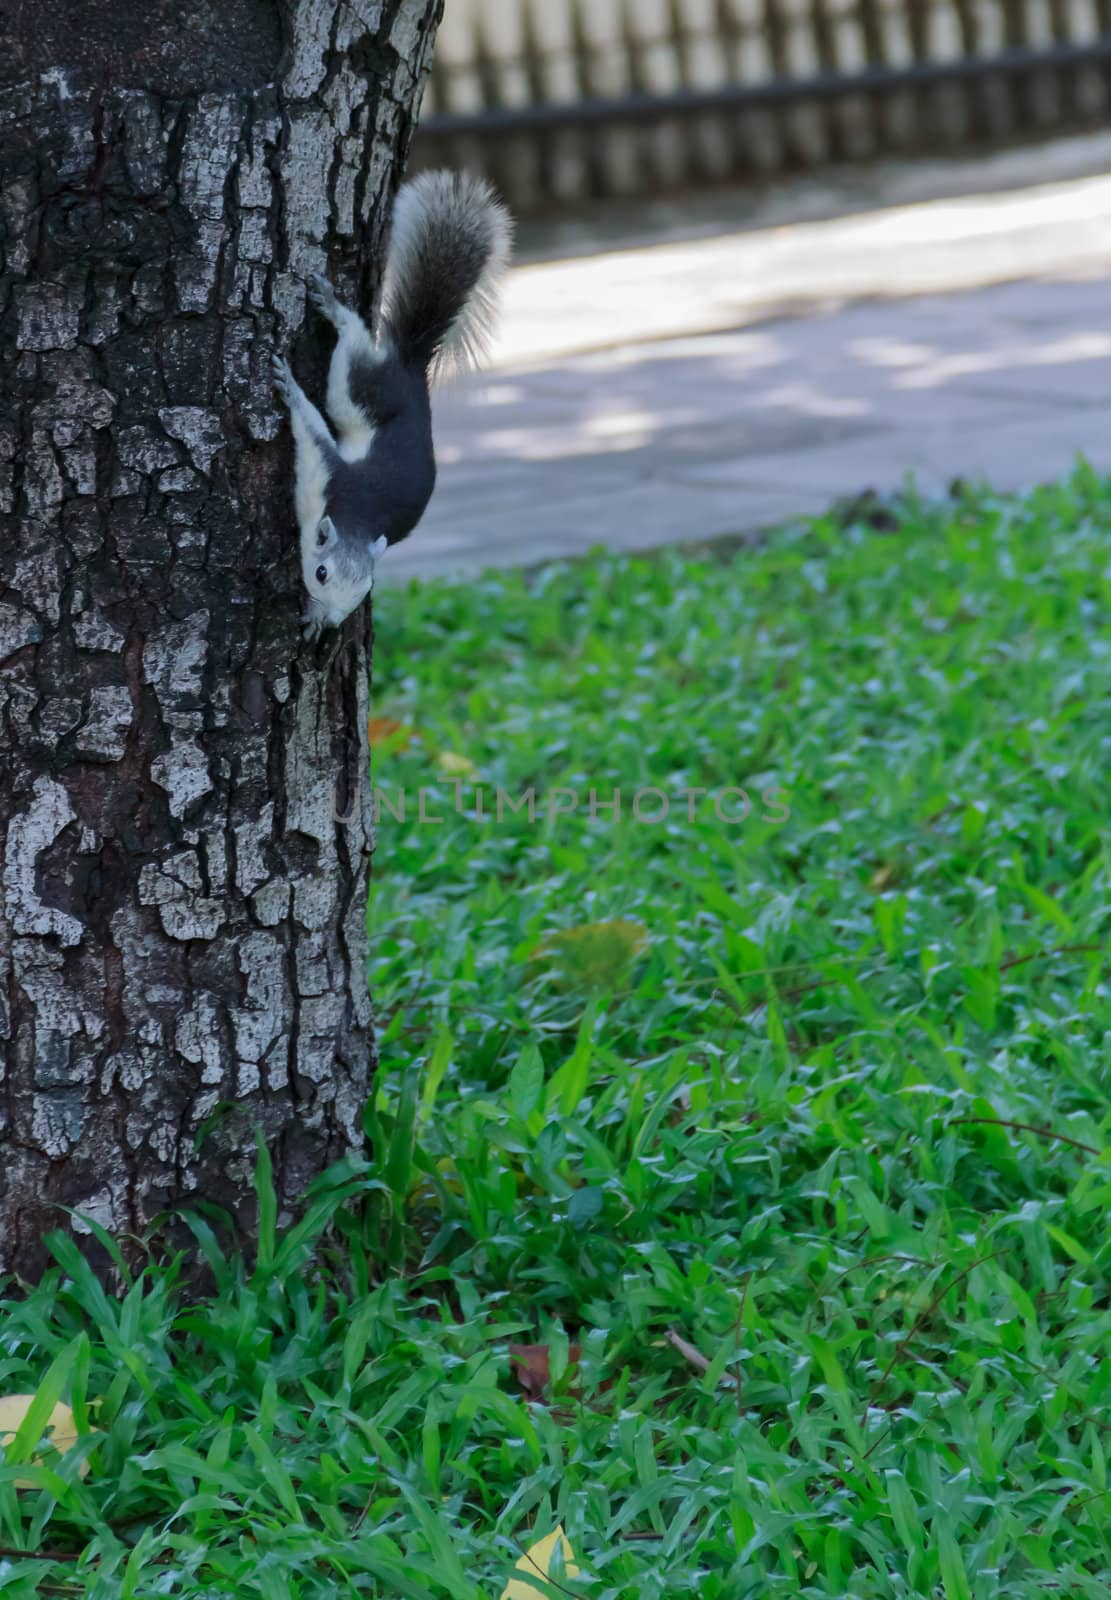 Squirrel Climbing Down from the Tree by punpleng